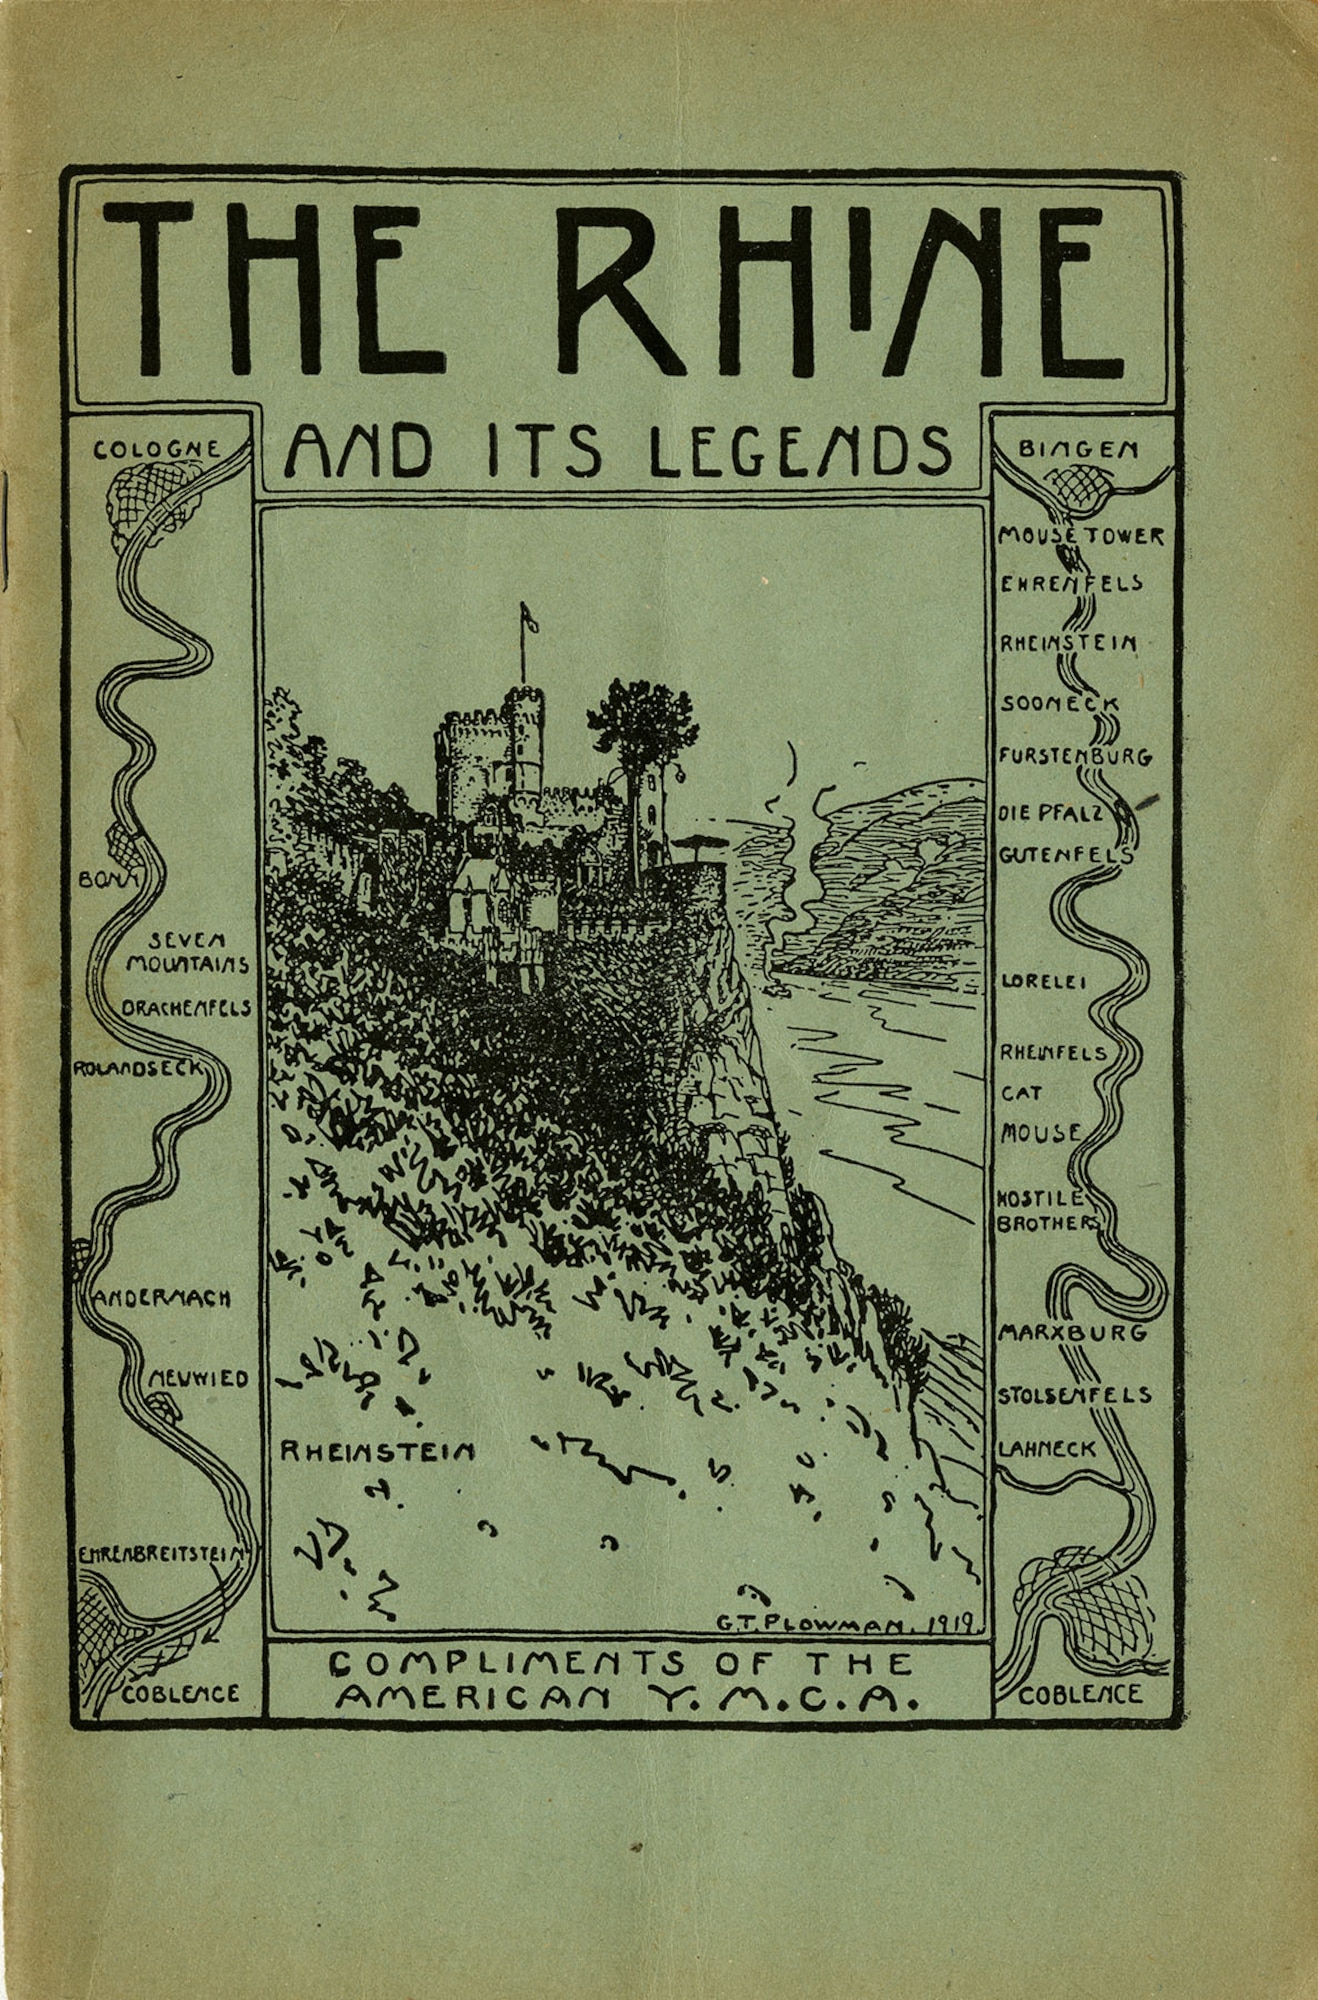 This sightseeing brochure was produced by the YMCA for soldiers serving with the American Army of Occupation headquartered at Coblenz, Germany. This pamphlet, produced in February 1919, was written by Alfred J. Pearson of Duke University and illustrated by George T. Plowman. It summarizes the history and legends of the many castles and historic locations bordering the Rhine River near Coblenz. (U.S. Air Force photo)